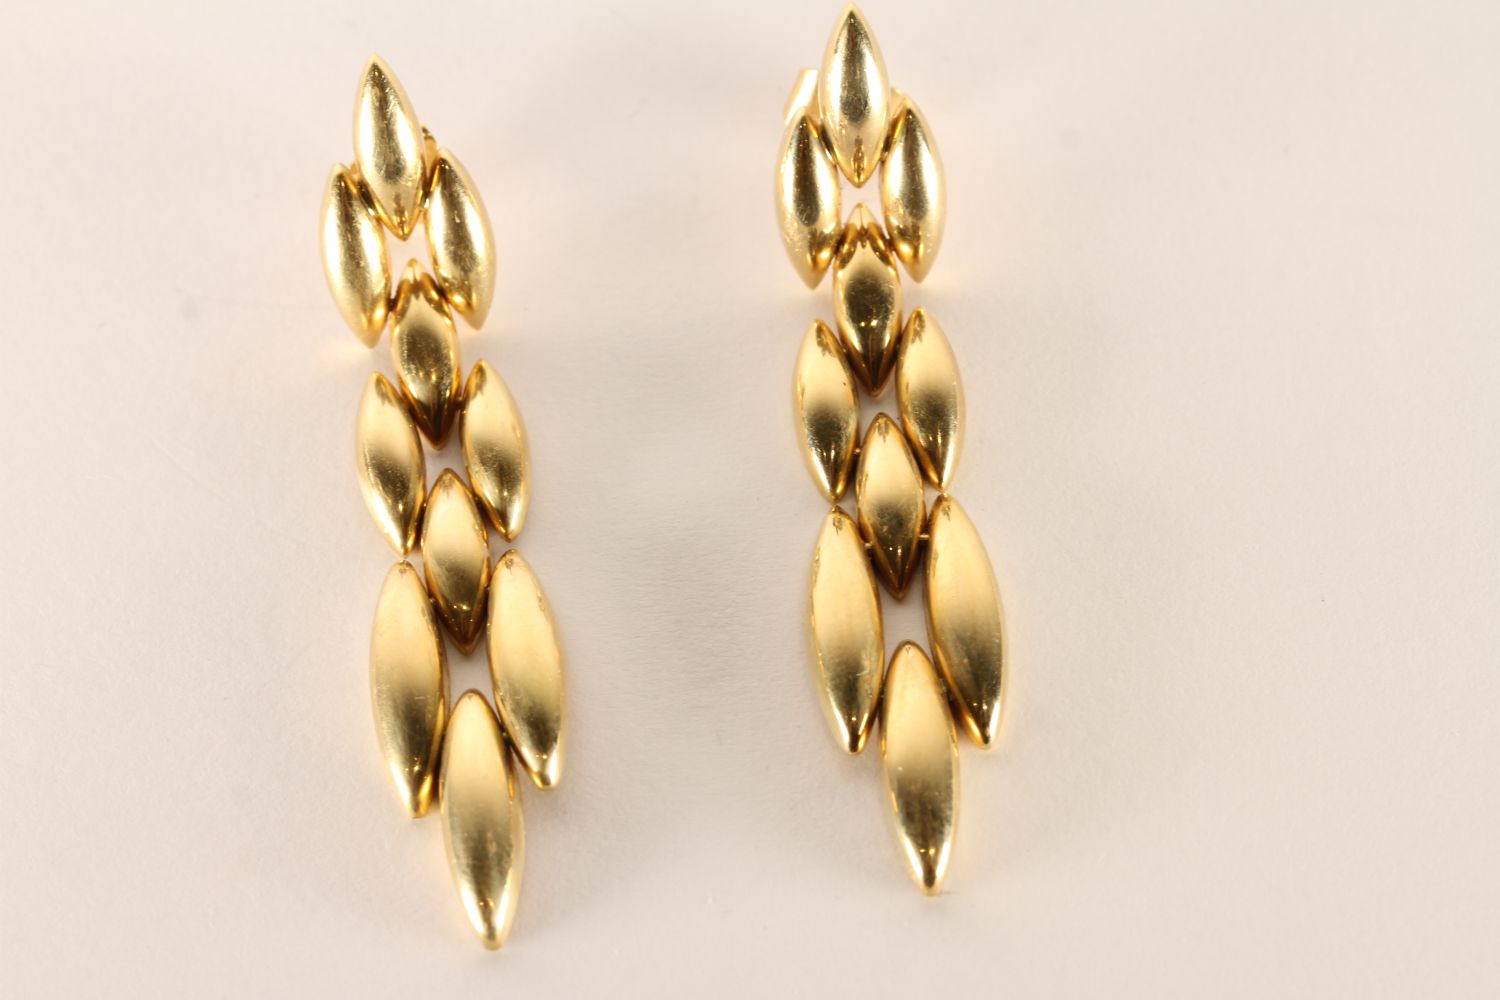 A Pair of 18ct link design earrings, smooth tear drop links, Cartier 1989, B30504 marks, 13.8g